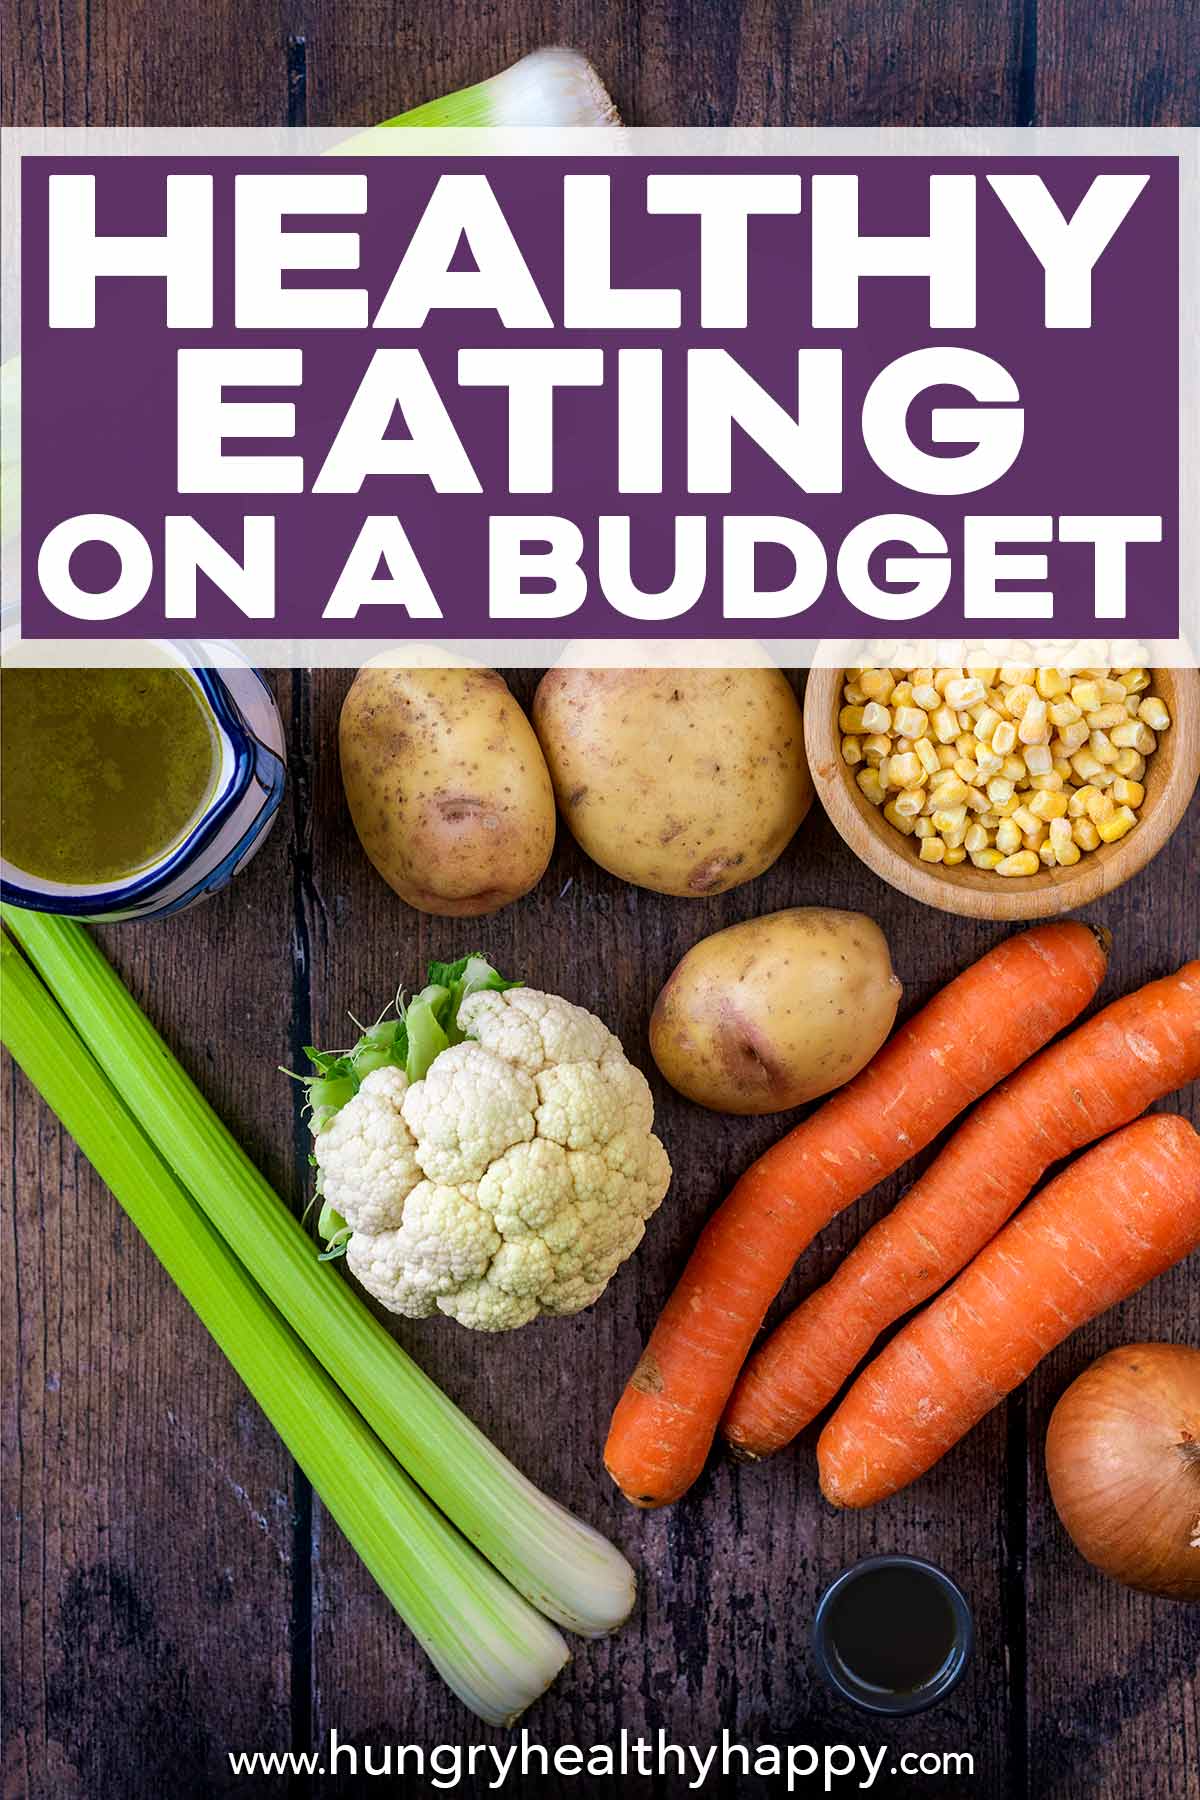 Vegetables on a wooden surface with text overlay saying Healthy Eating on a Budget.